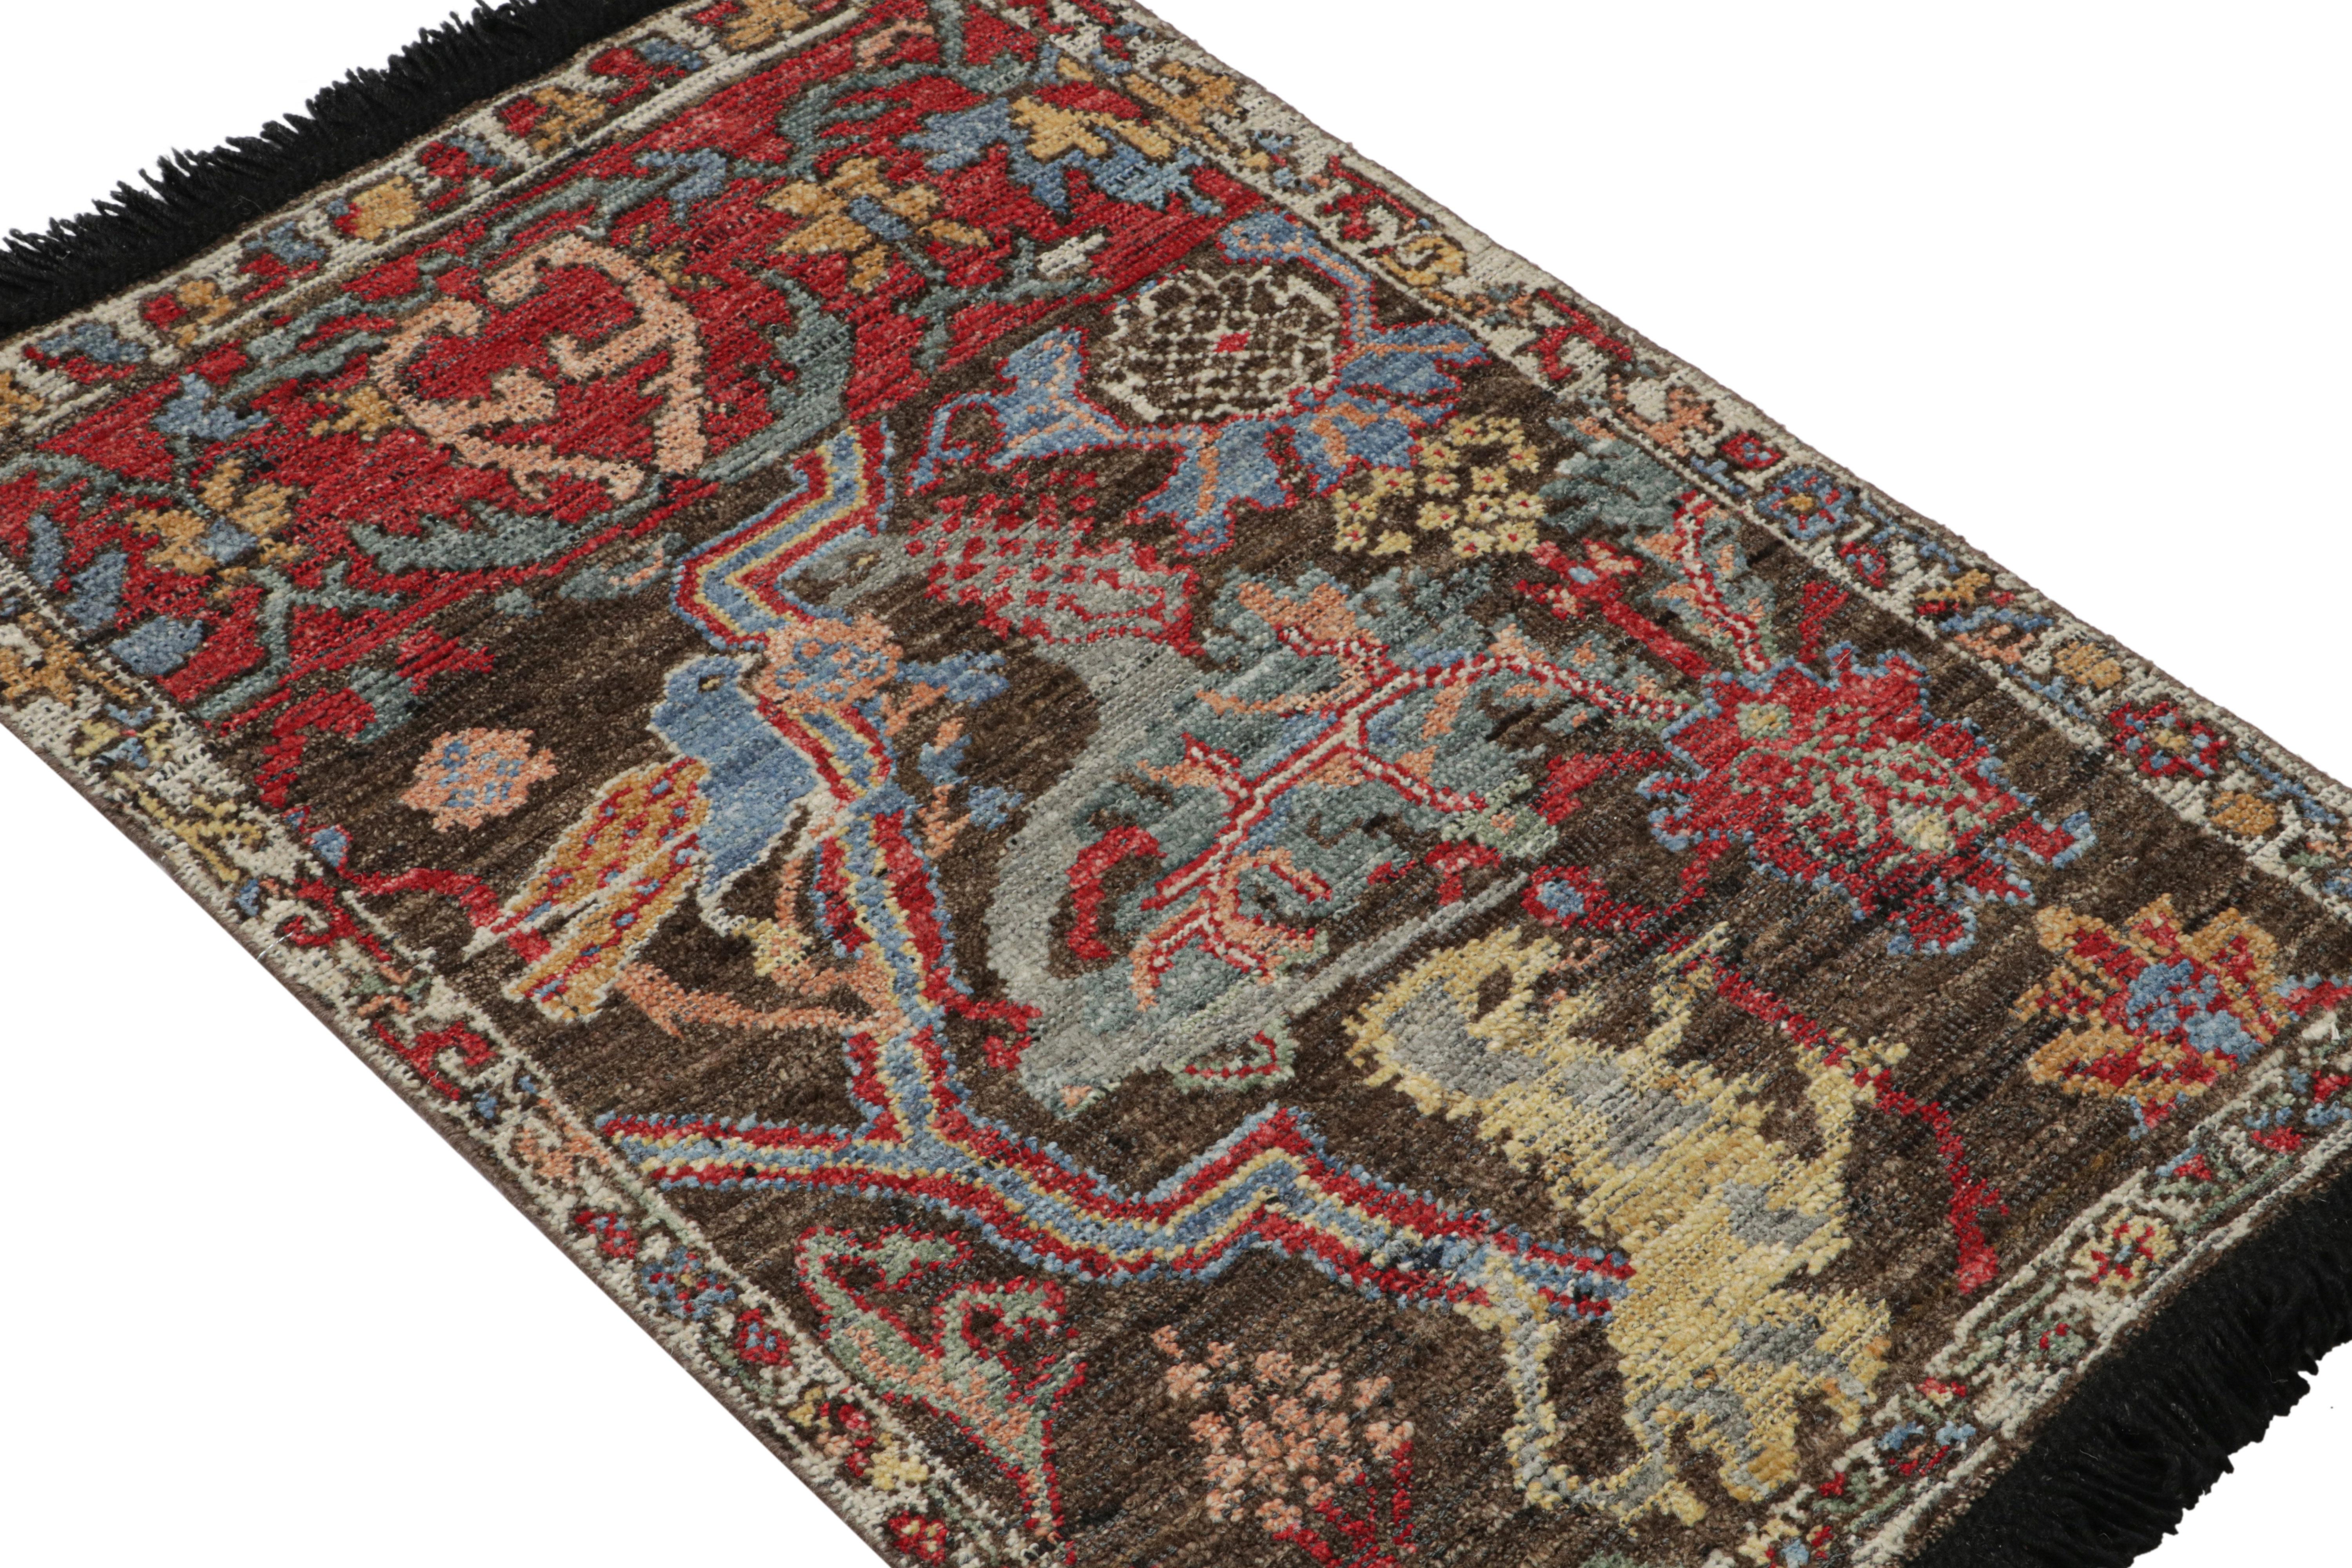 Hand-knotted in wool, this 2x3 rug from the Burano Collection features pictorial patterns, as seen in depictions of birds and even possible dragons in a colorful scene among nature. 

On the design: 

Connoisseurs will admire this pictorial rug as a